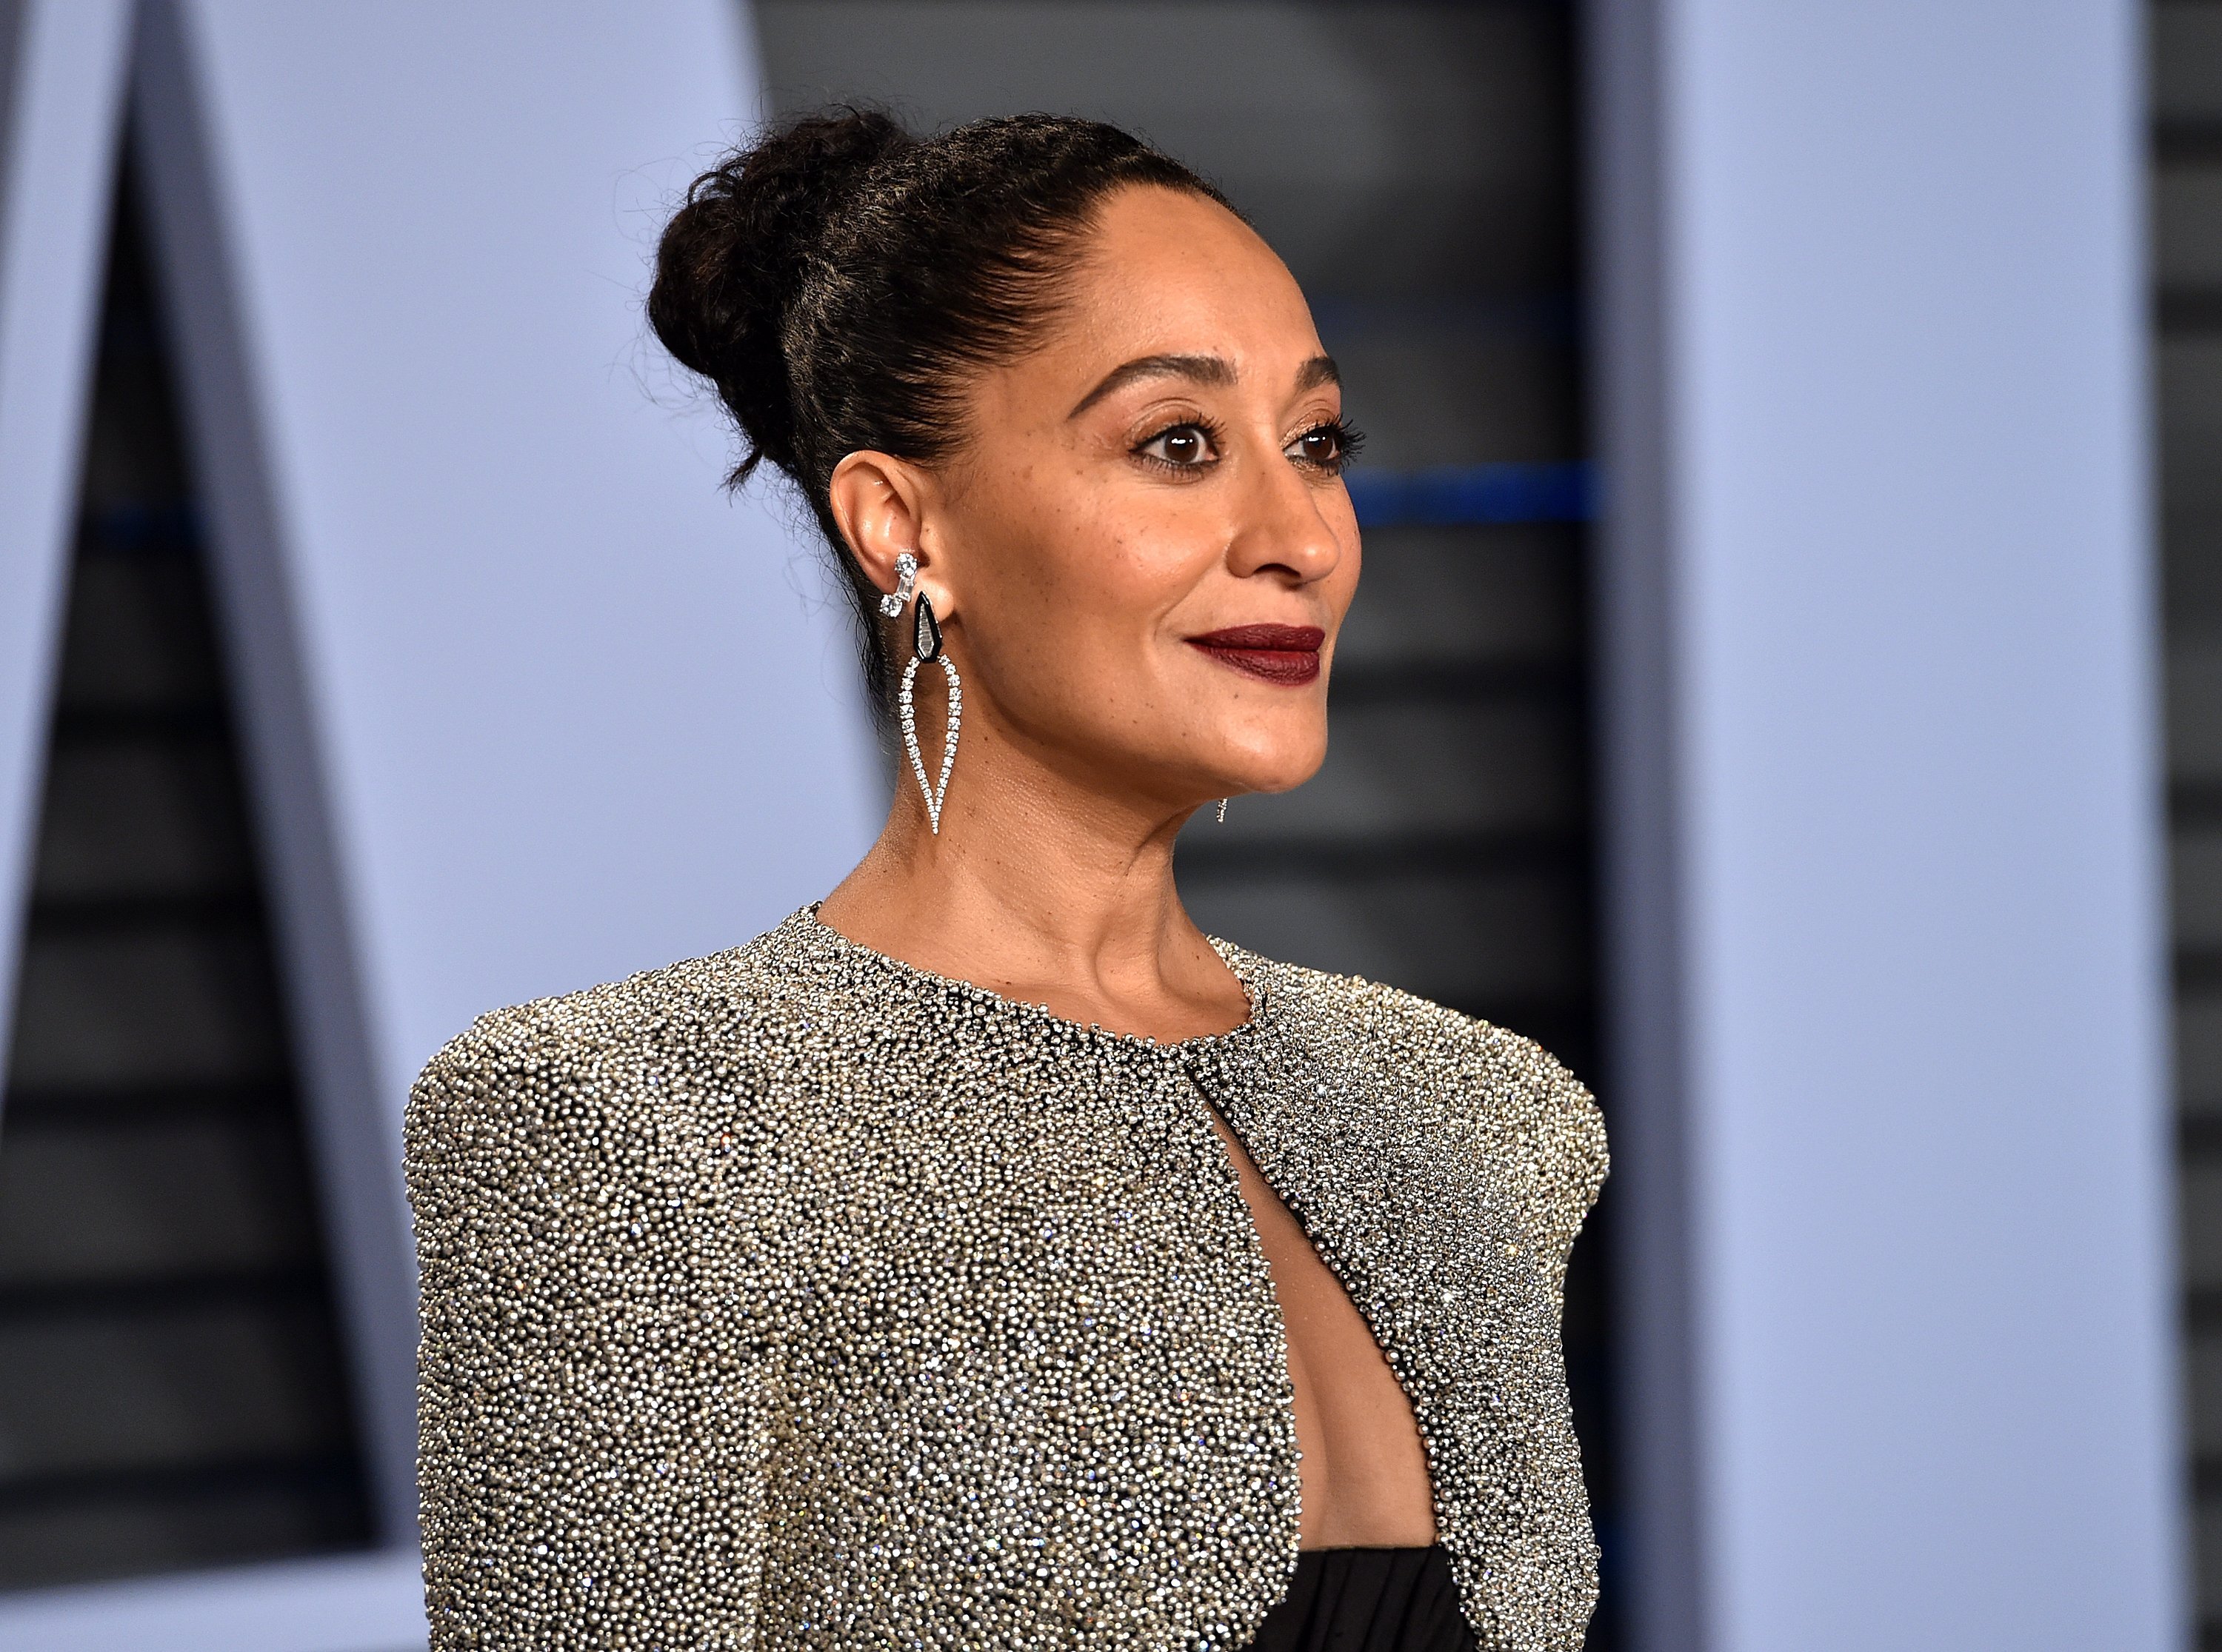 Tracee Ellis Ross at the 2018 Vanity Fair Oscar Party. | Photo: Getty Images